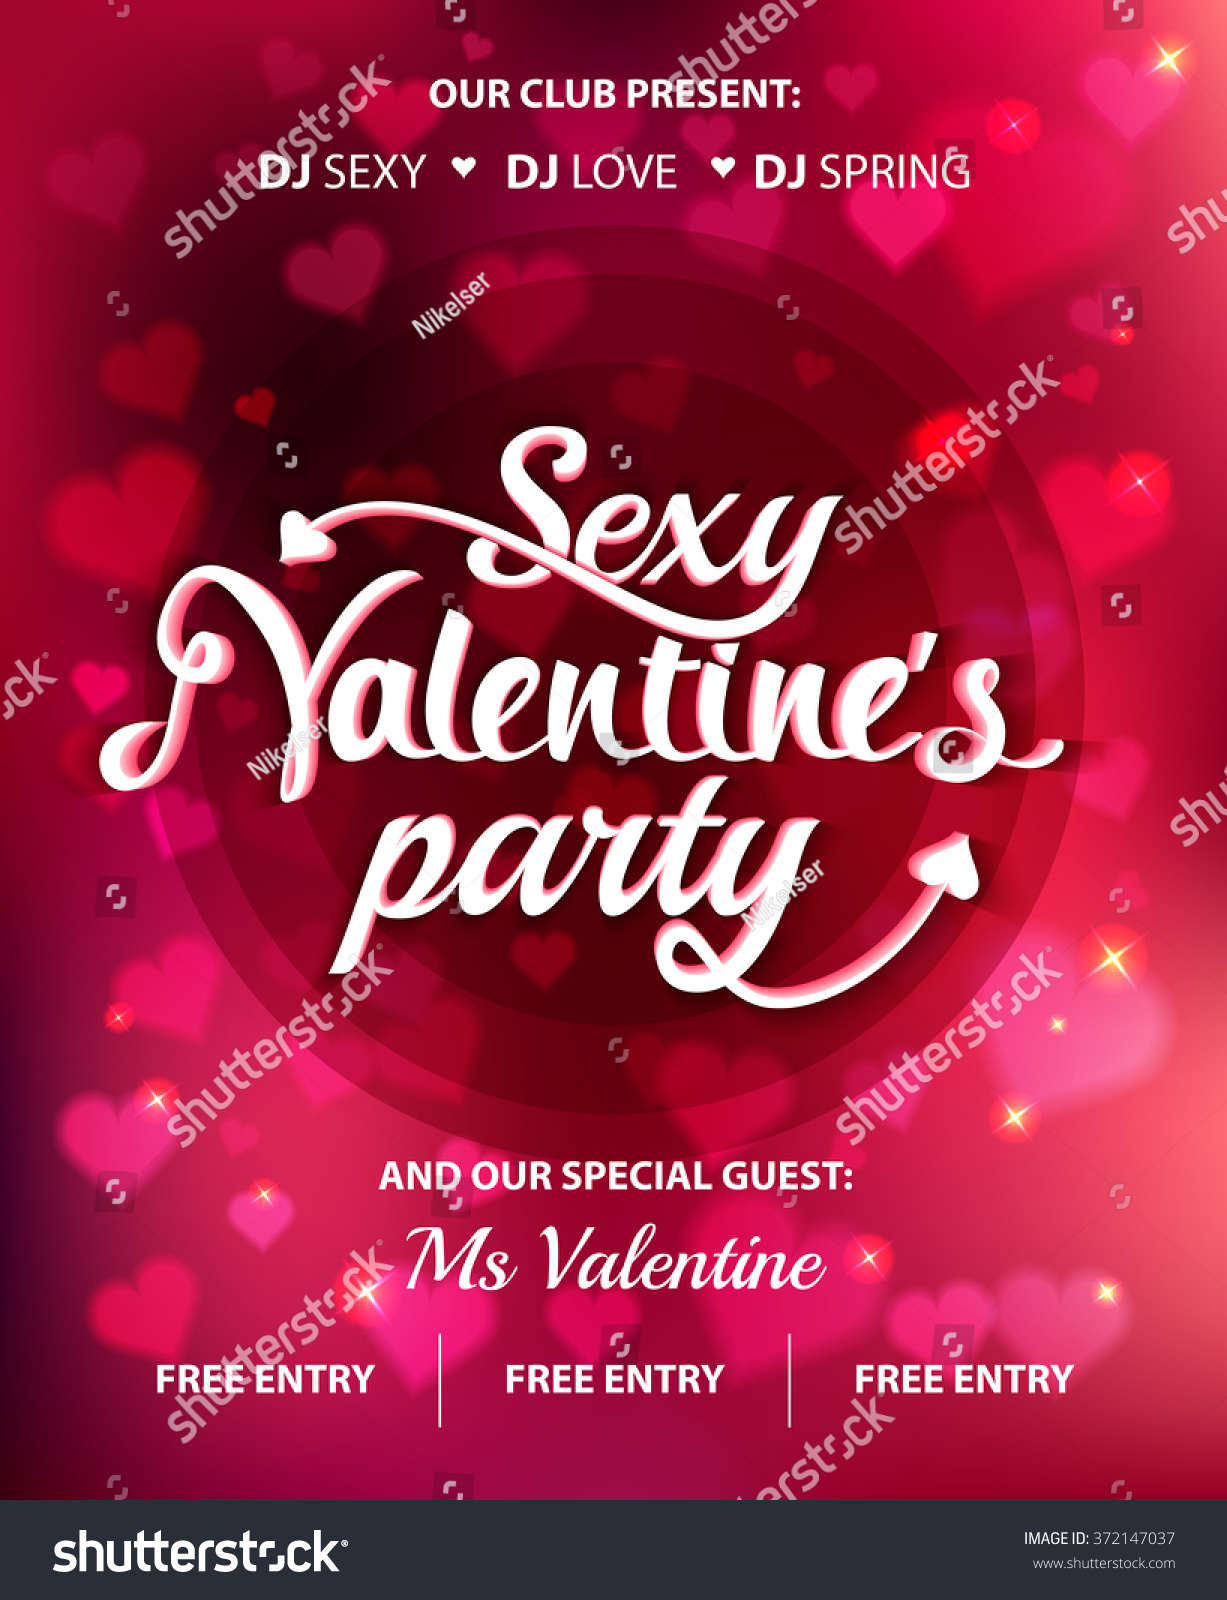 Sexy Valentines Day Party Flyer Vector Royalty Free Stock Vector 372147037